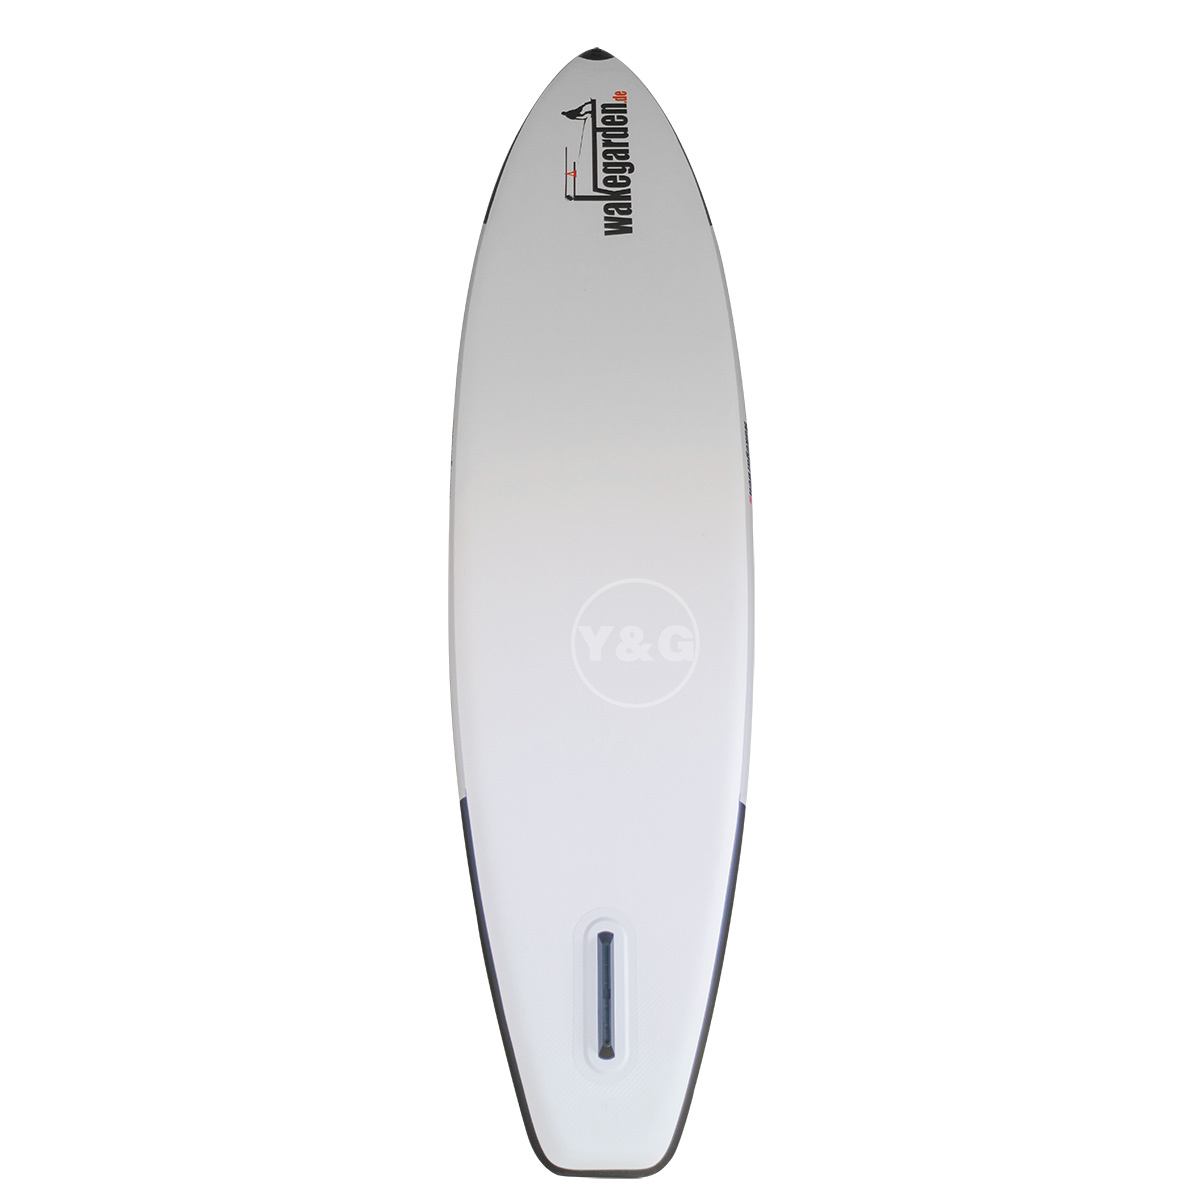 Black & White Aerated Paddle BoardYPD-83